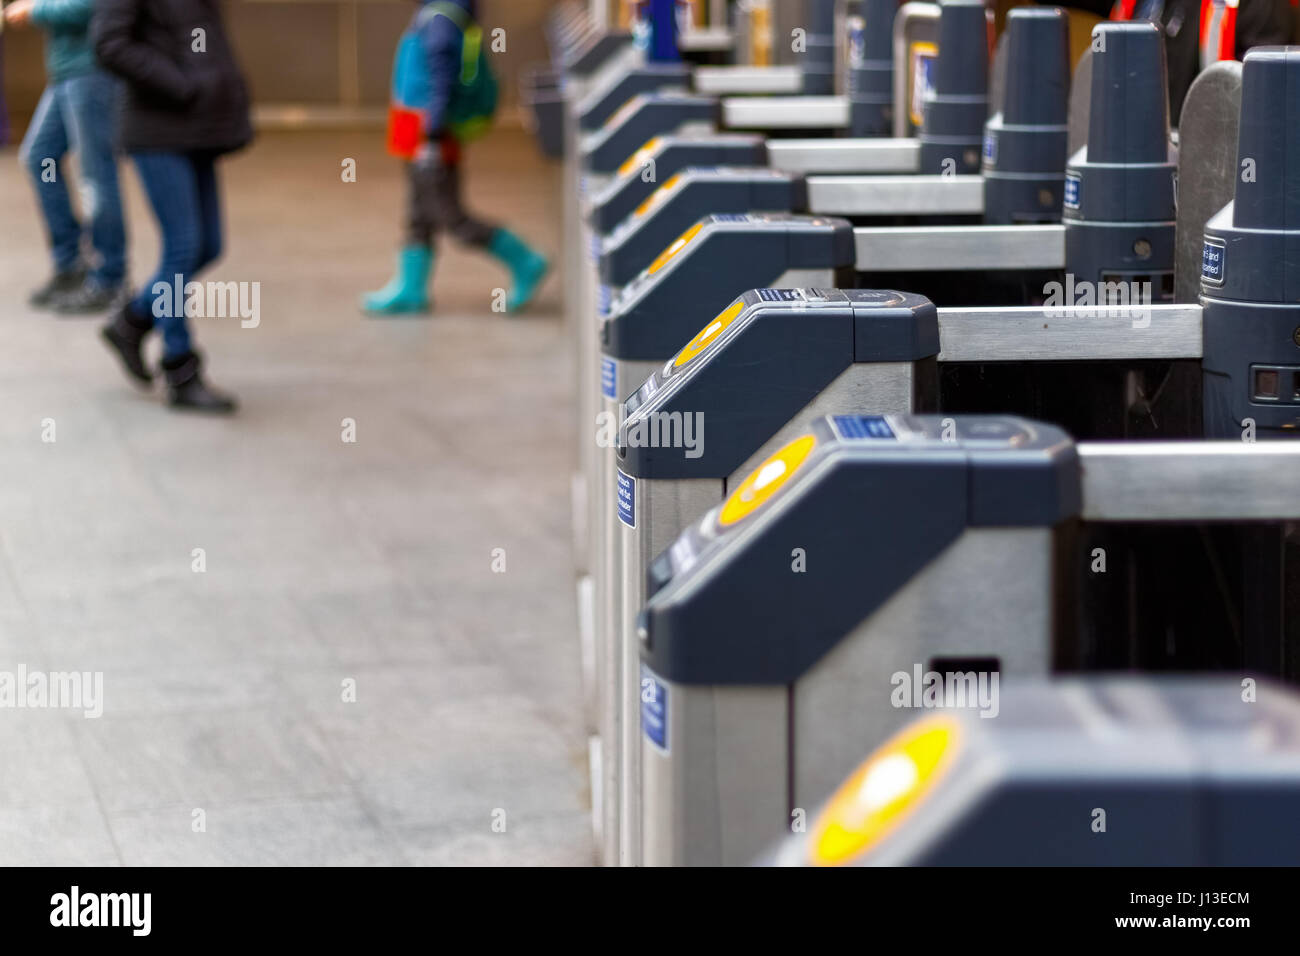 London, UK - February 28, 2017 - Ticket barrier at King's Cross station with people walking in the background Stock Photo